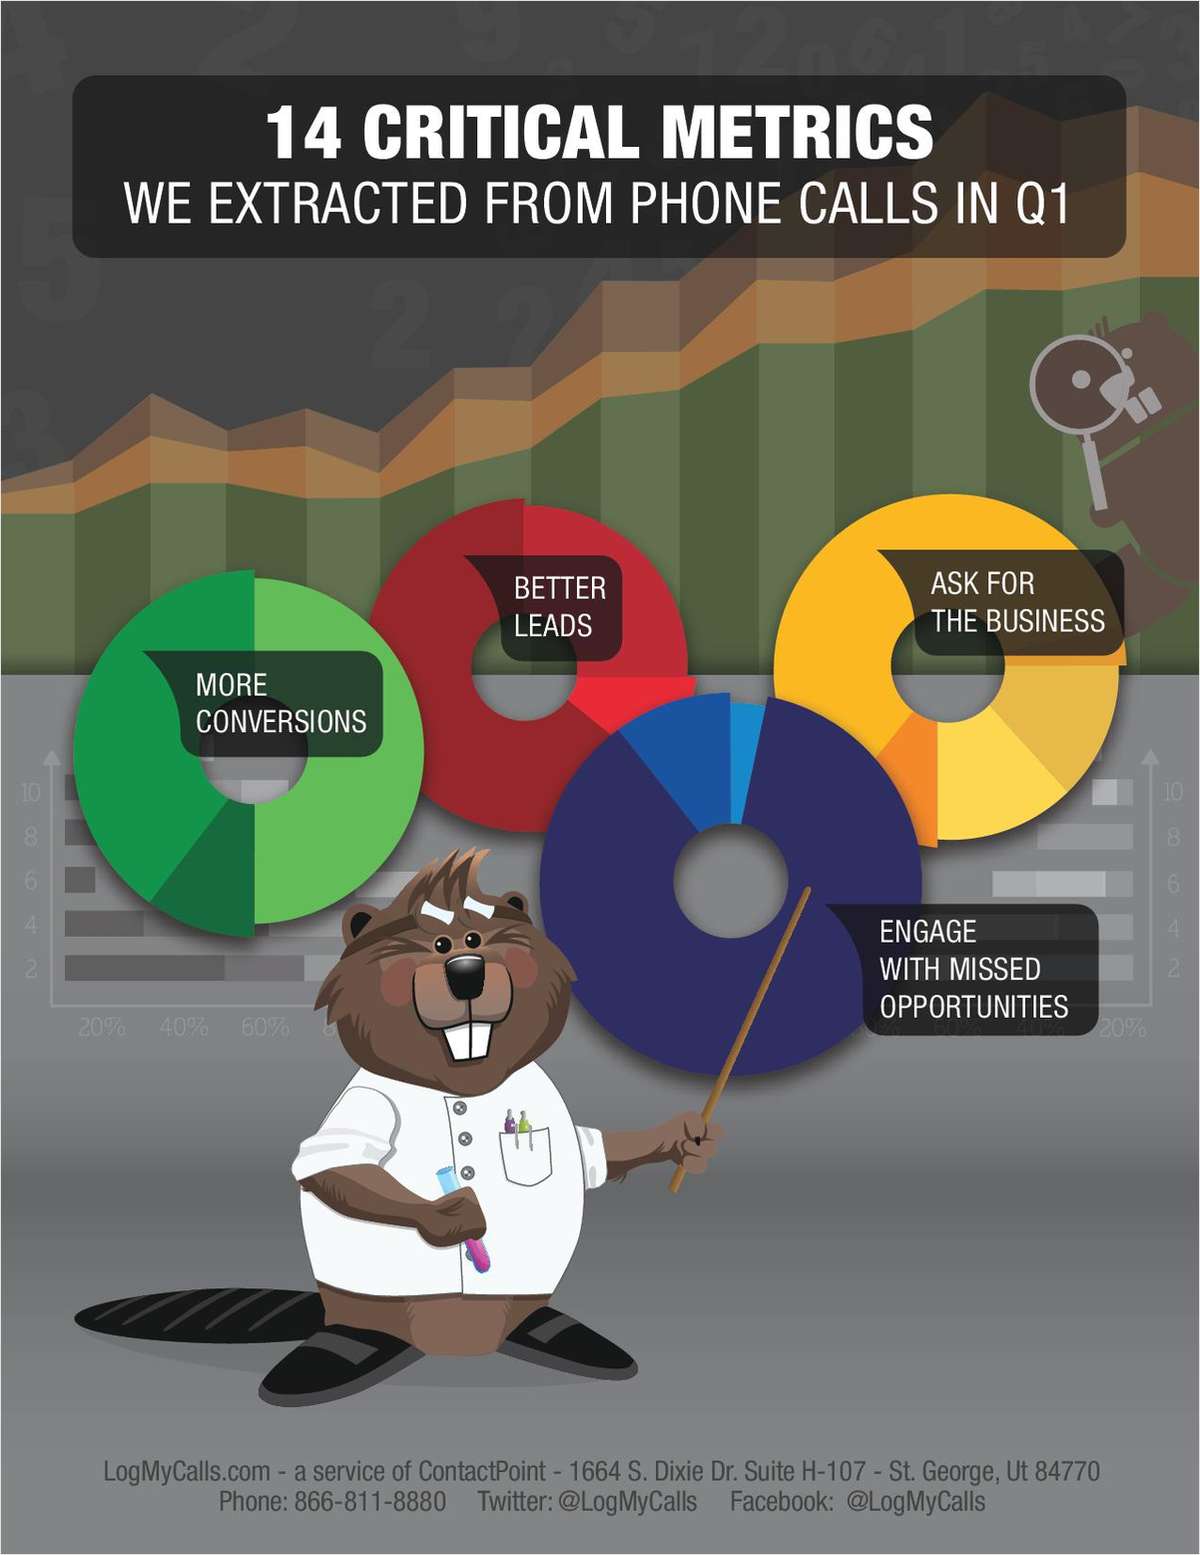 14 Critical Metrics We Extracted from Phone Calls in Q1